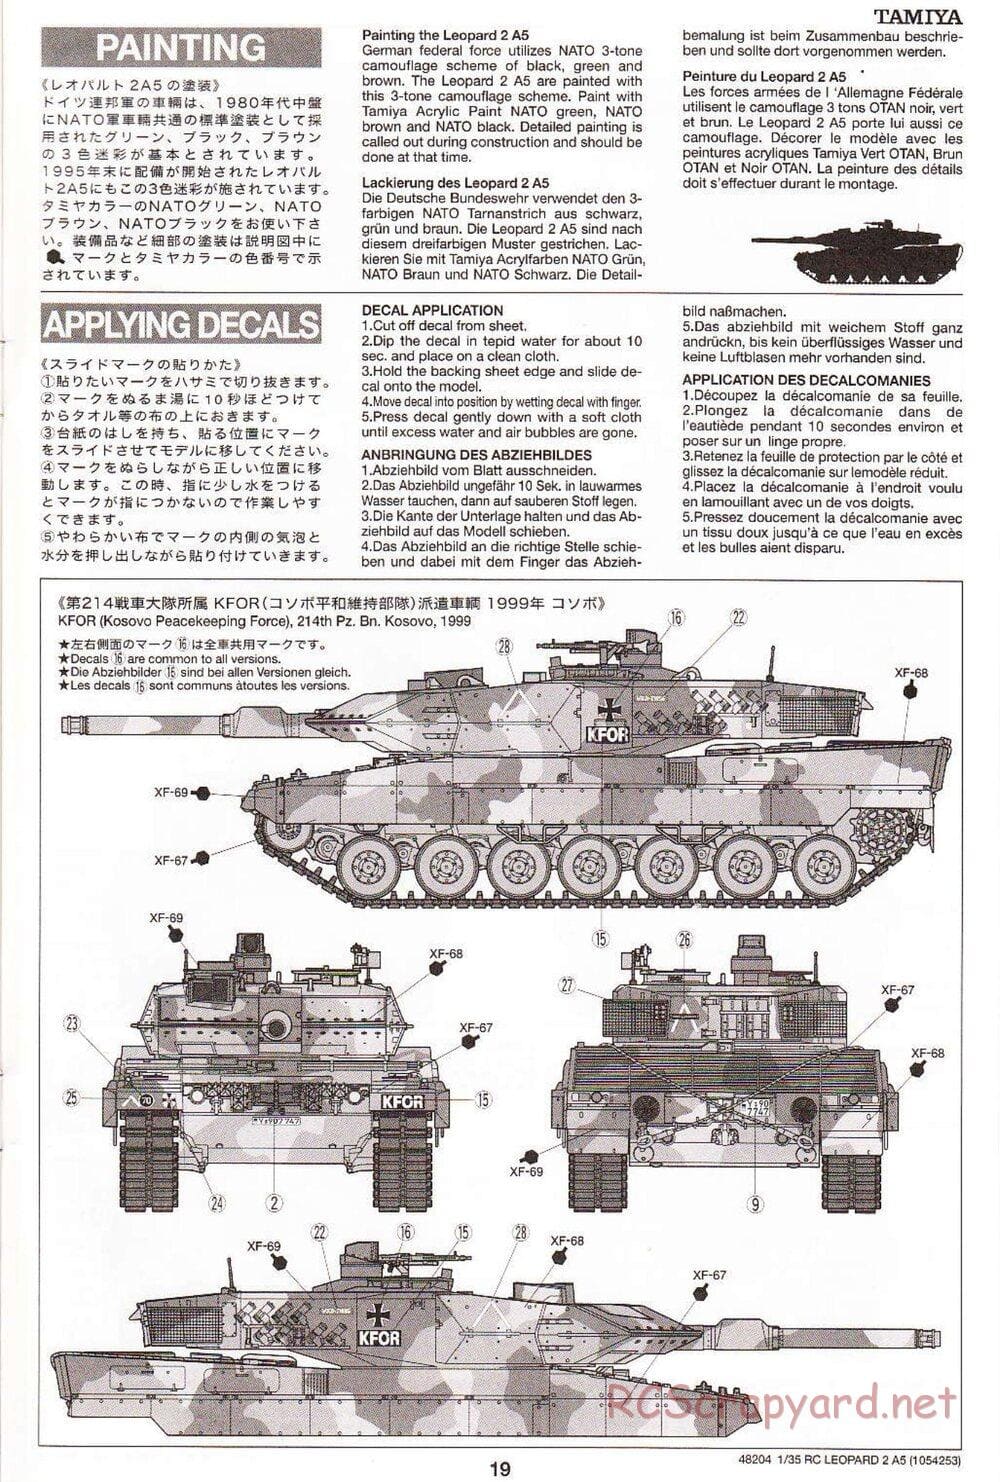 Tamiya - Leopard 2 A5 Main Battle Tank - 1/35 Scale Chassis - Manual - Page 19